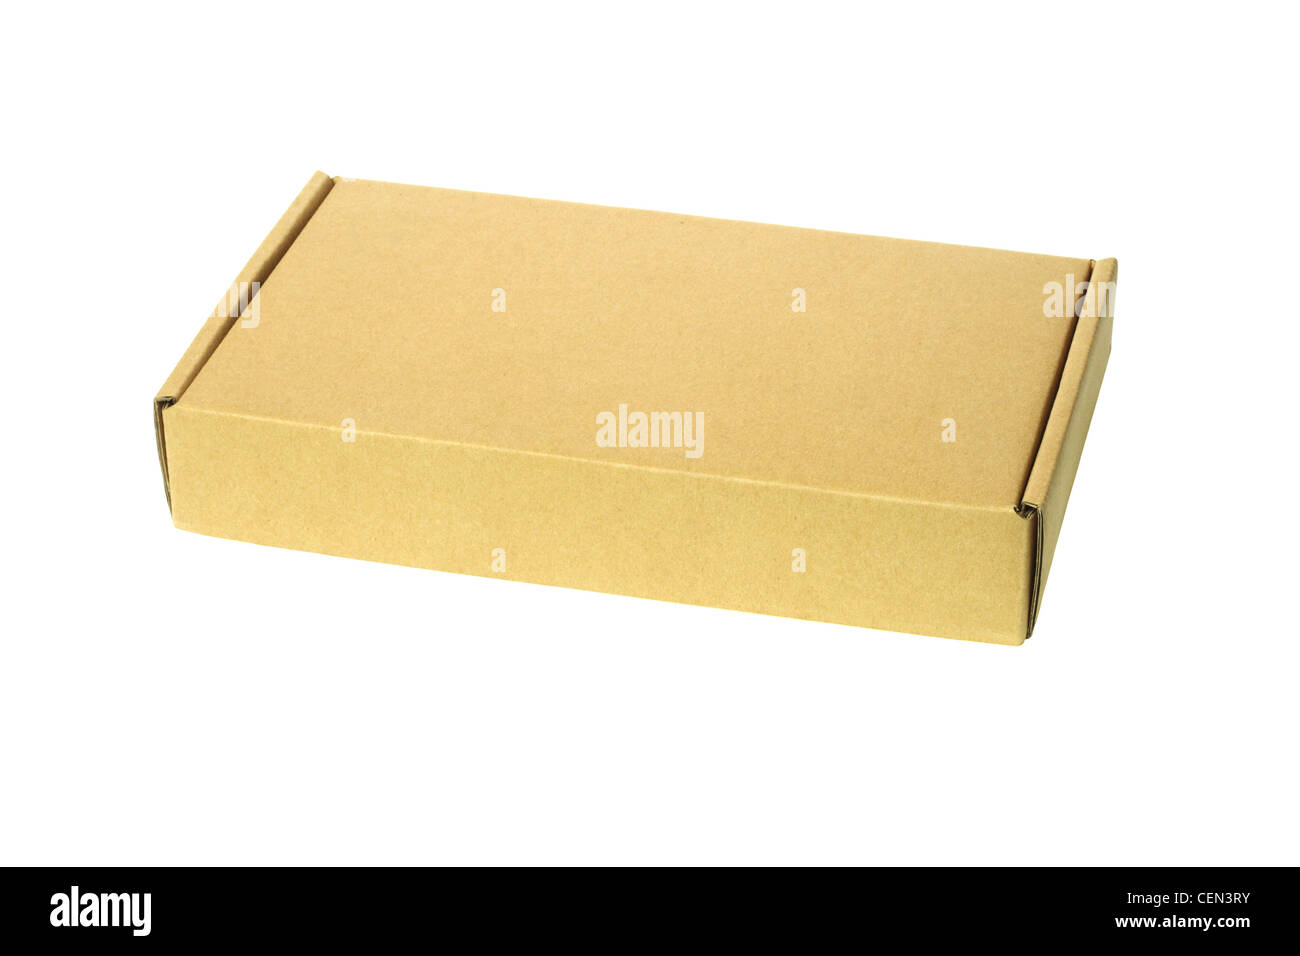 Closed Blank Paper Box on White Background Stock Photo